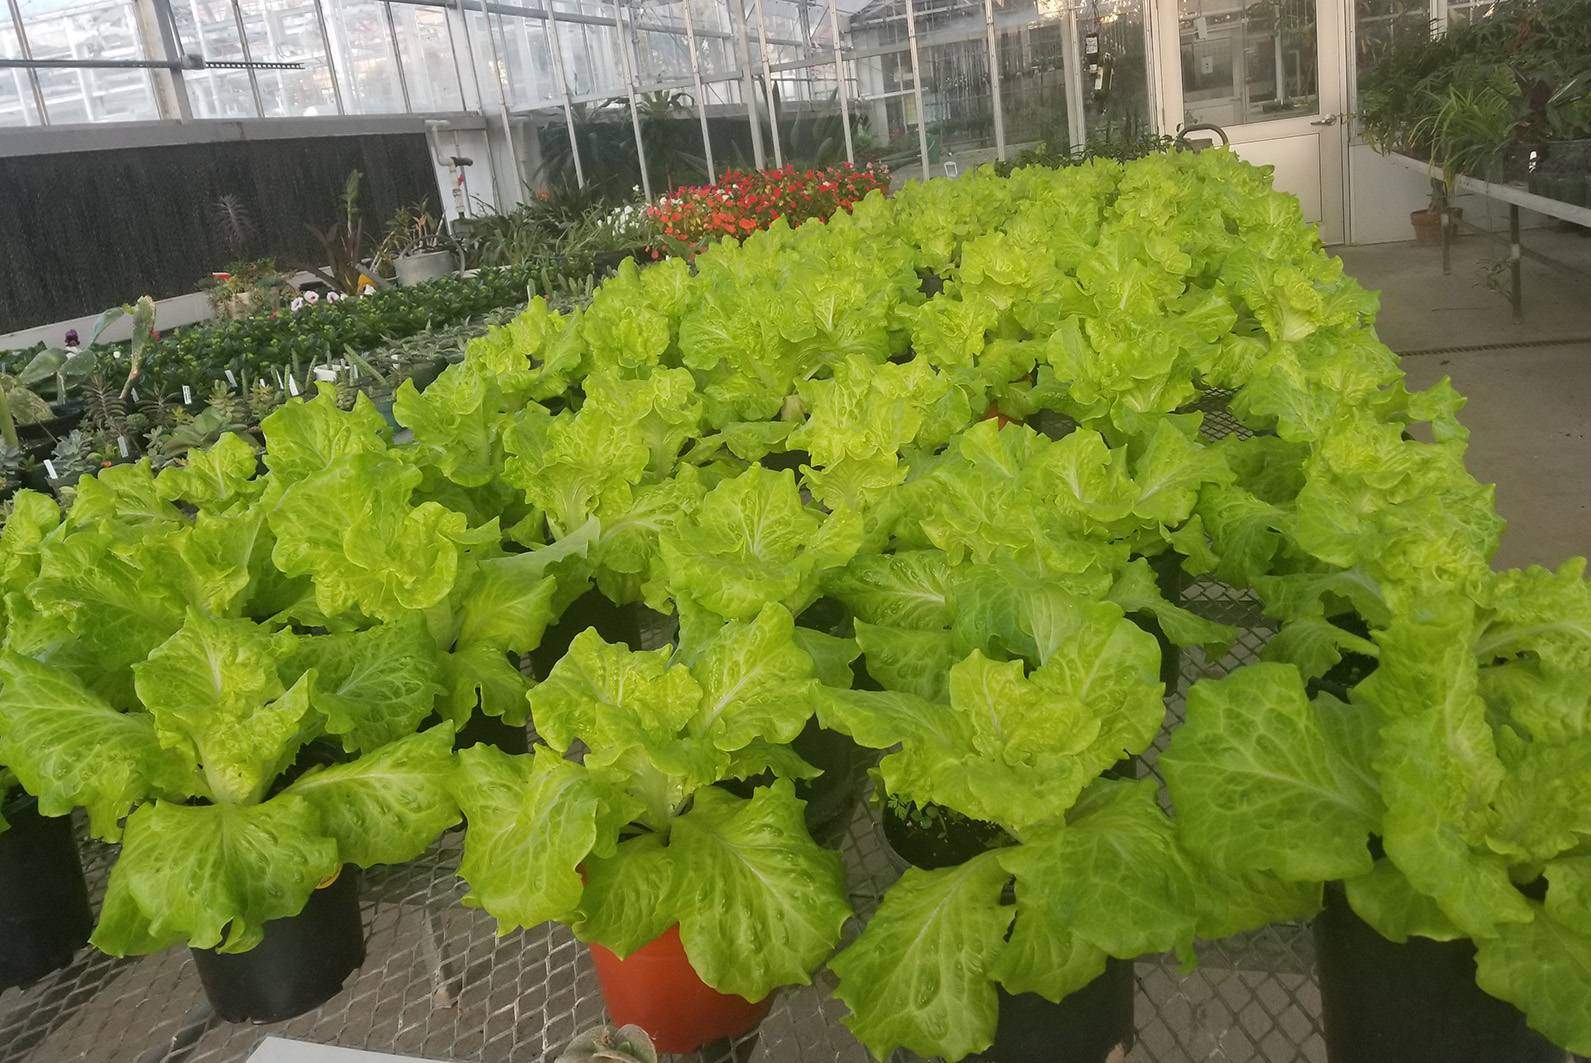 leafy greens lined up in greenhouse